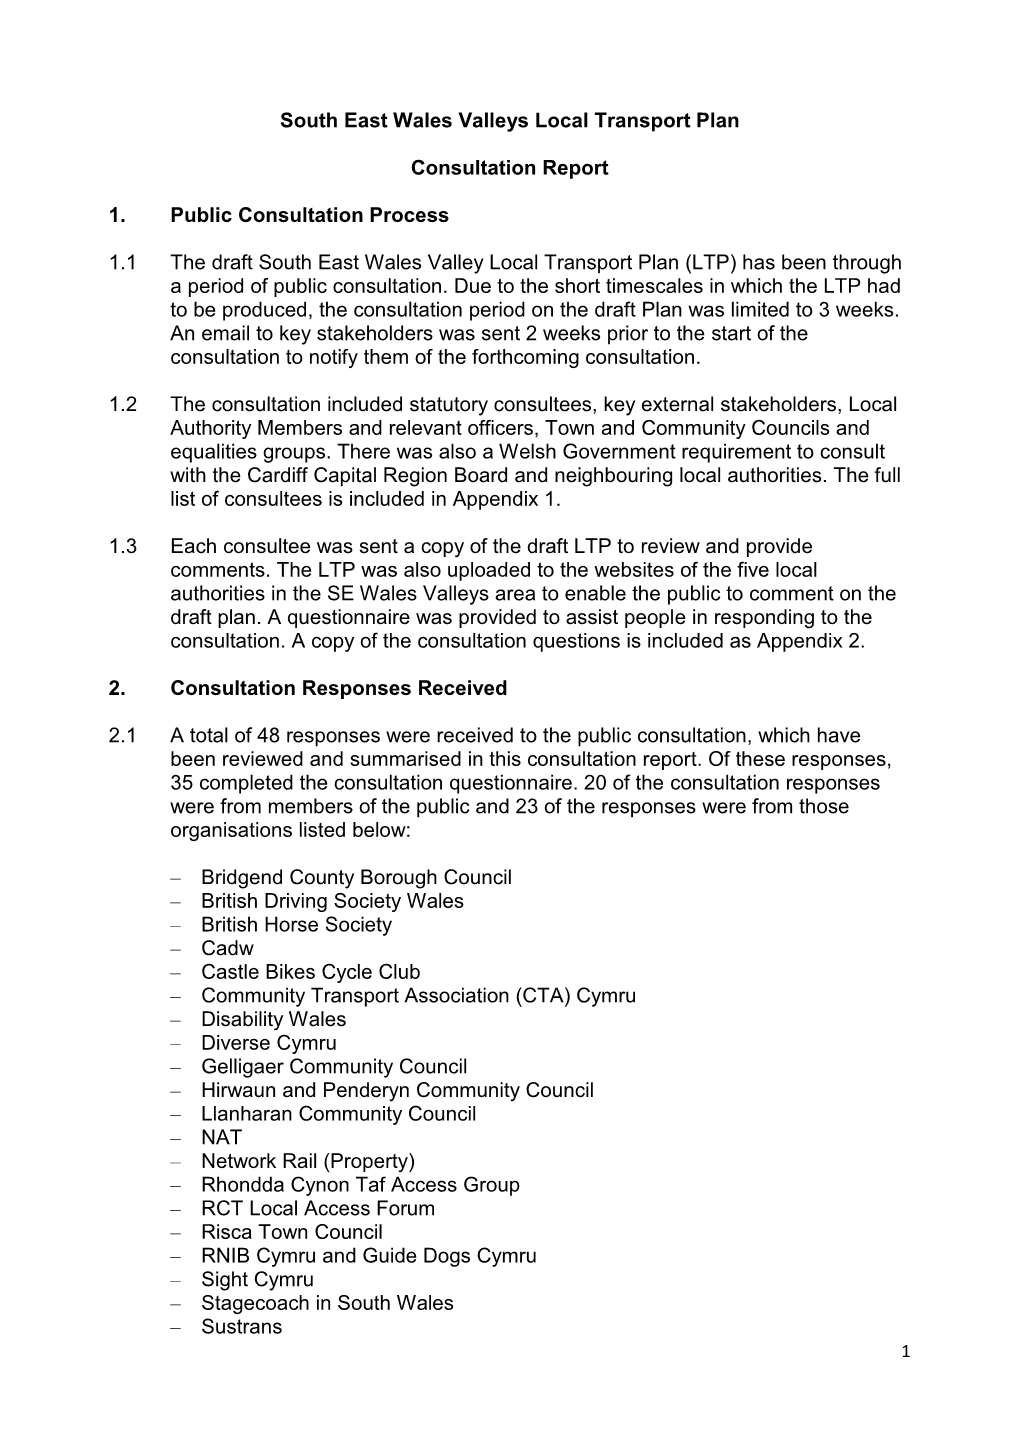 South East Wales Valleys Local Transport Plan Consultation Report 1. Public Consultation Process 1.1 the Draft South East Wale